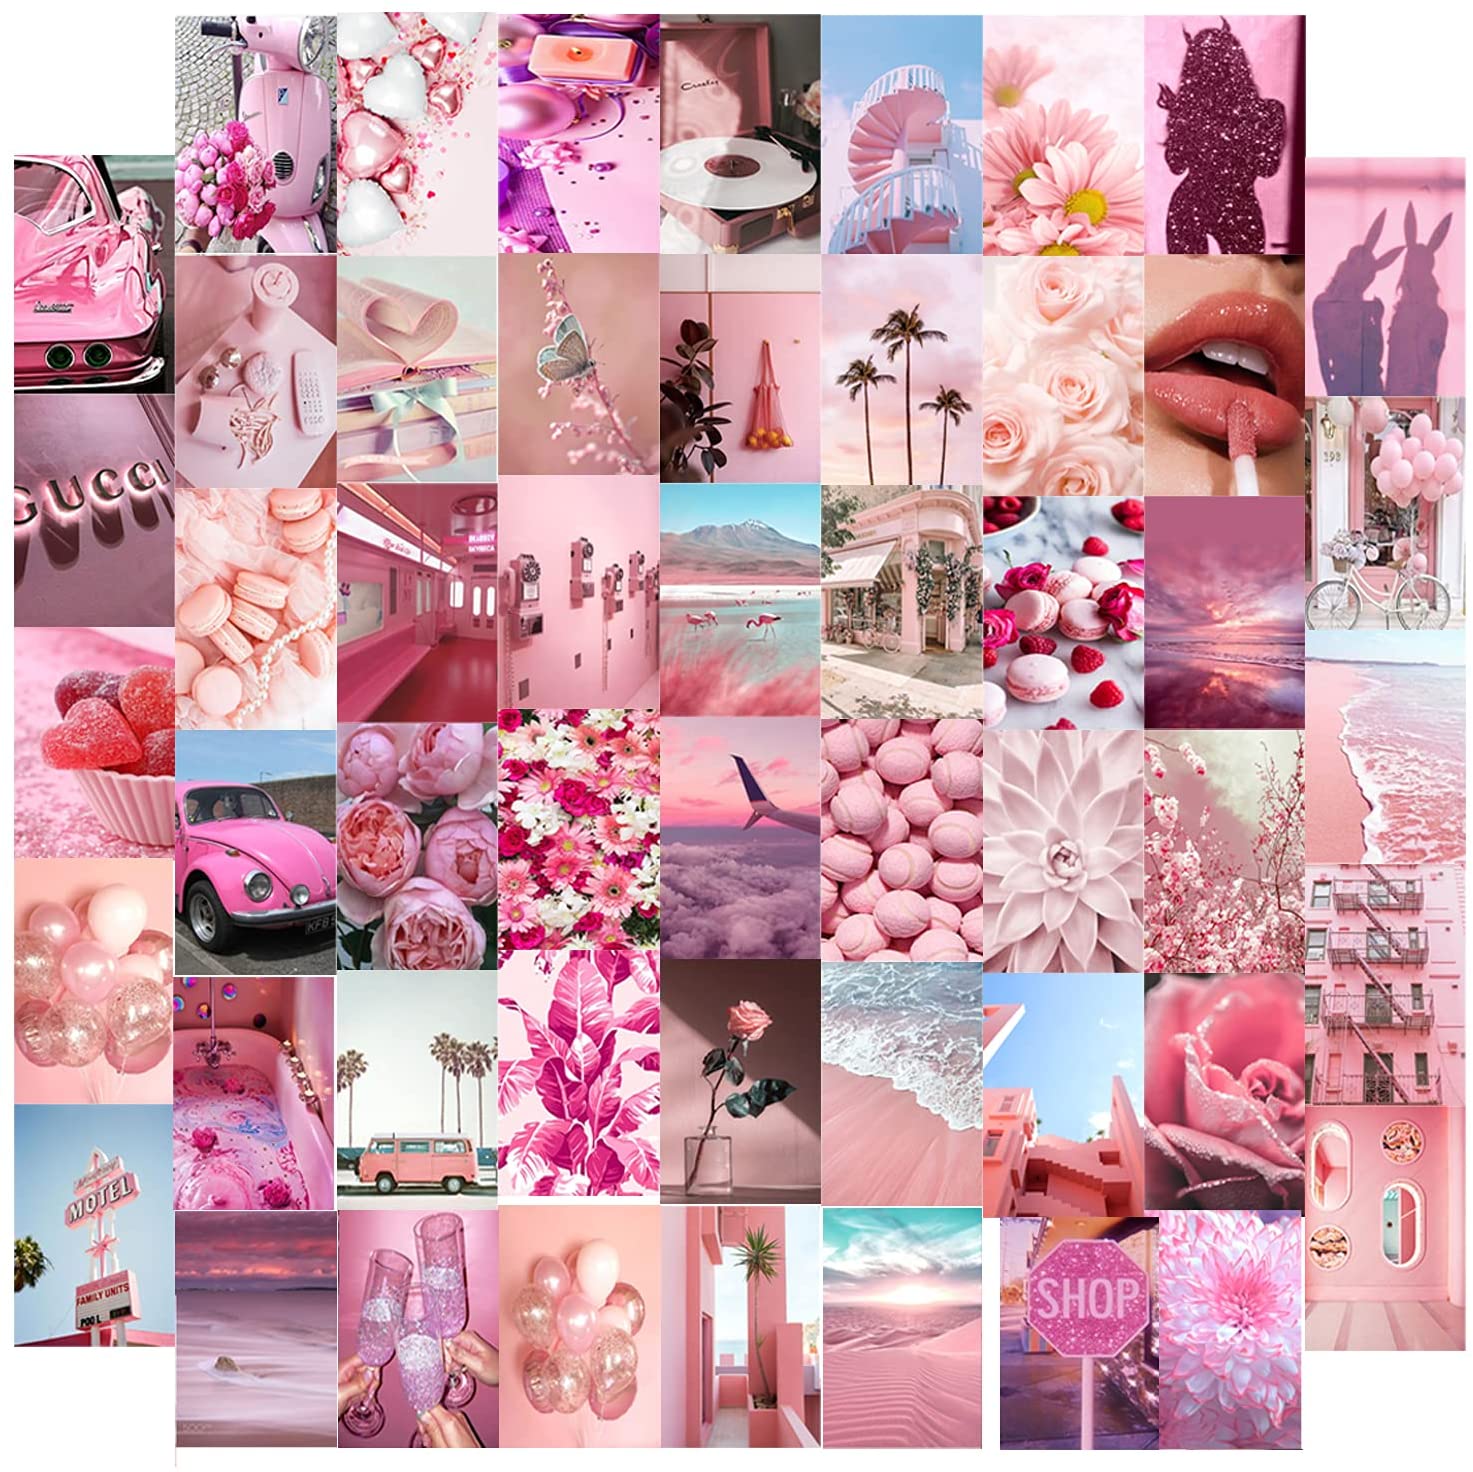 Buy Rivco Pink Wall Collage Kit, Aesthetic Picture Bedroom Decor for Teen Girls, Light Pink Color Dorm Photo Display for Cute Room Decor, Wall Décor (52 PCS 4*6 inch ) Online in